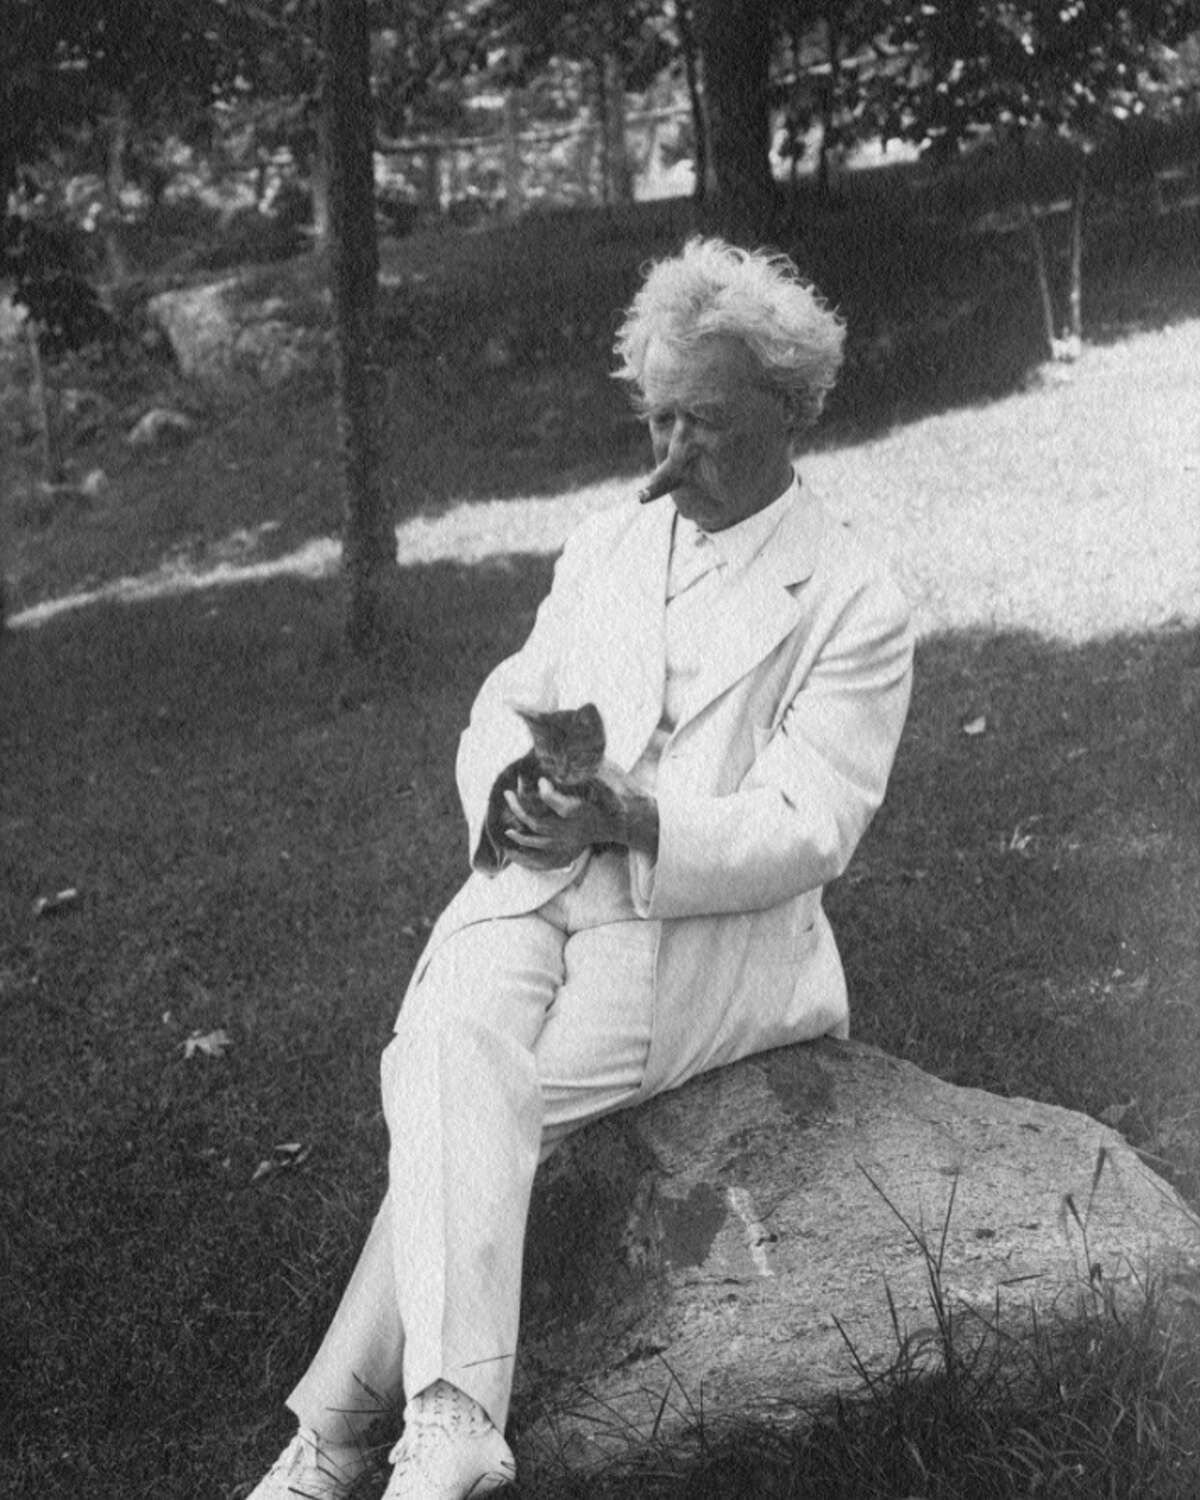 Samuel Clemens and his cat enjoy some time in Tuxedo, N.Y., in 1907. The author’s iconic white suit jacket will be featured in the exhibit, a loan from the Mark Twain Boyhood Museum in Hannibal, M.O.